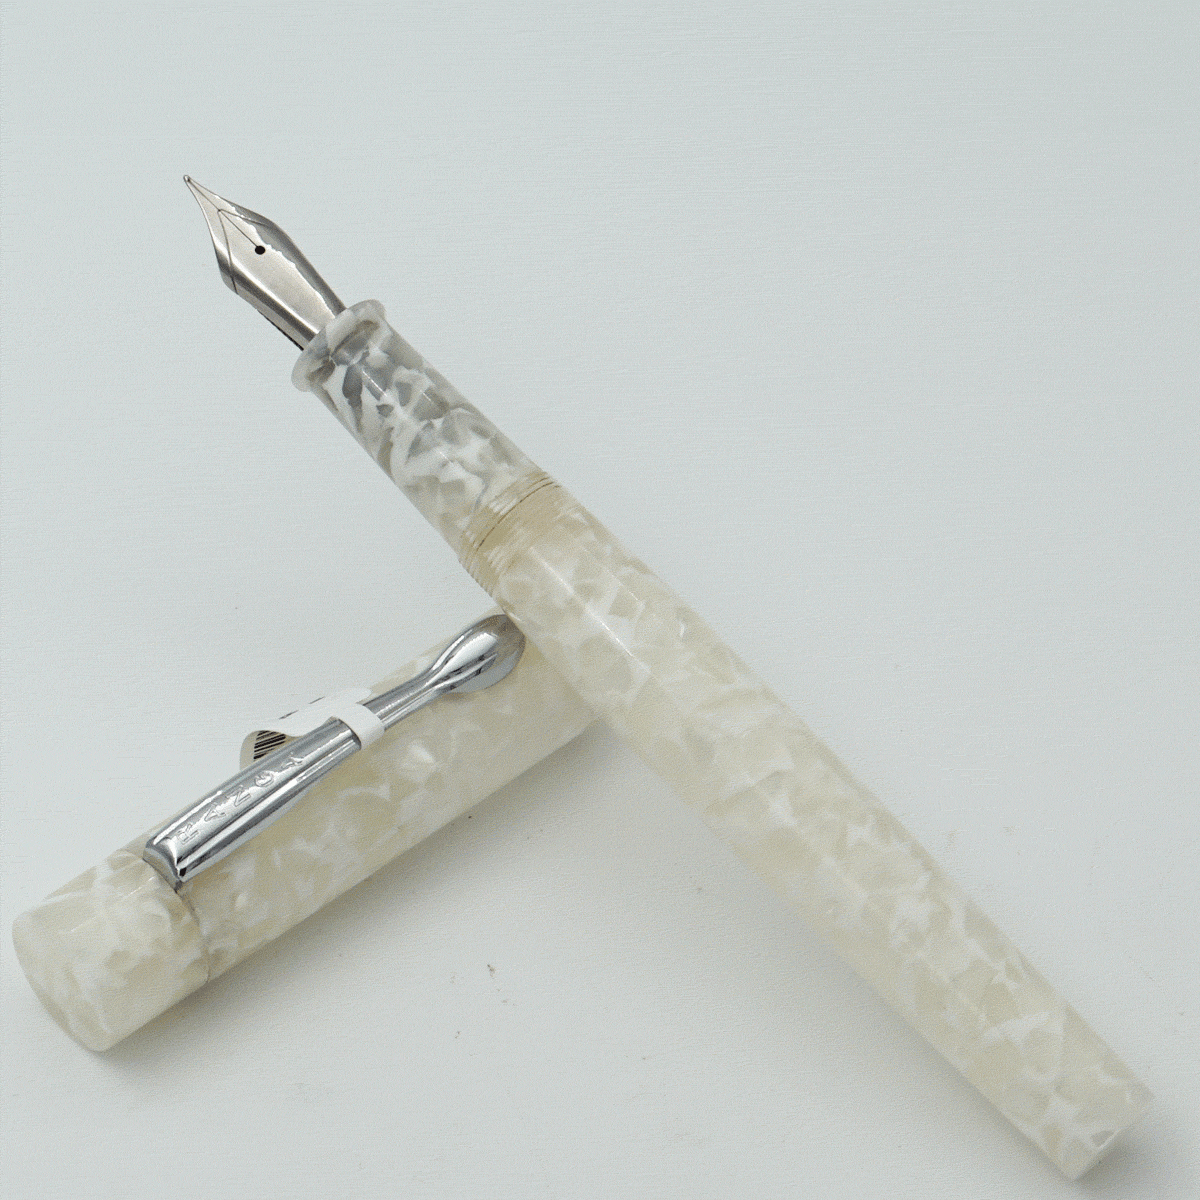 Ranga Handmade Model 3 Premium Acrylic P9 white Cracked Ice Color Body With Silver Clip German Jowo Nib Converter Type Fountain Pen (Nib Can be Customized With Fine or Medium or Broad) SKU 24248